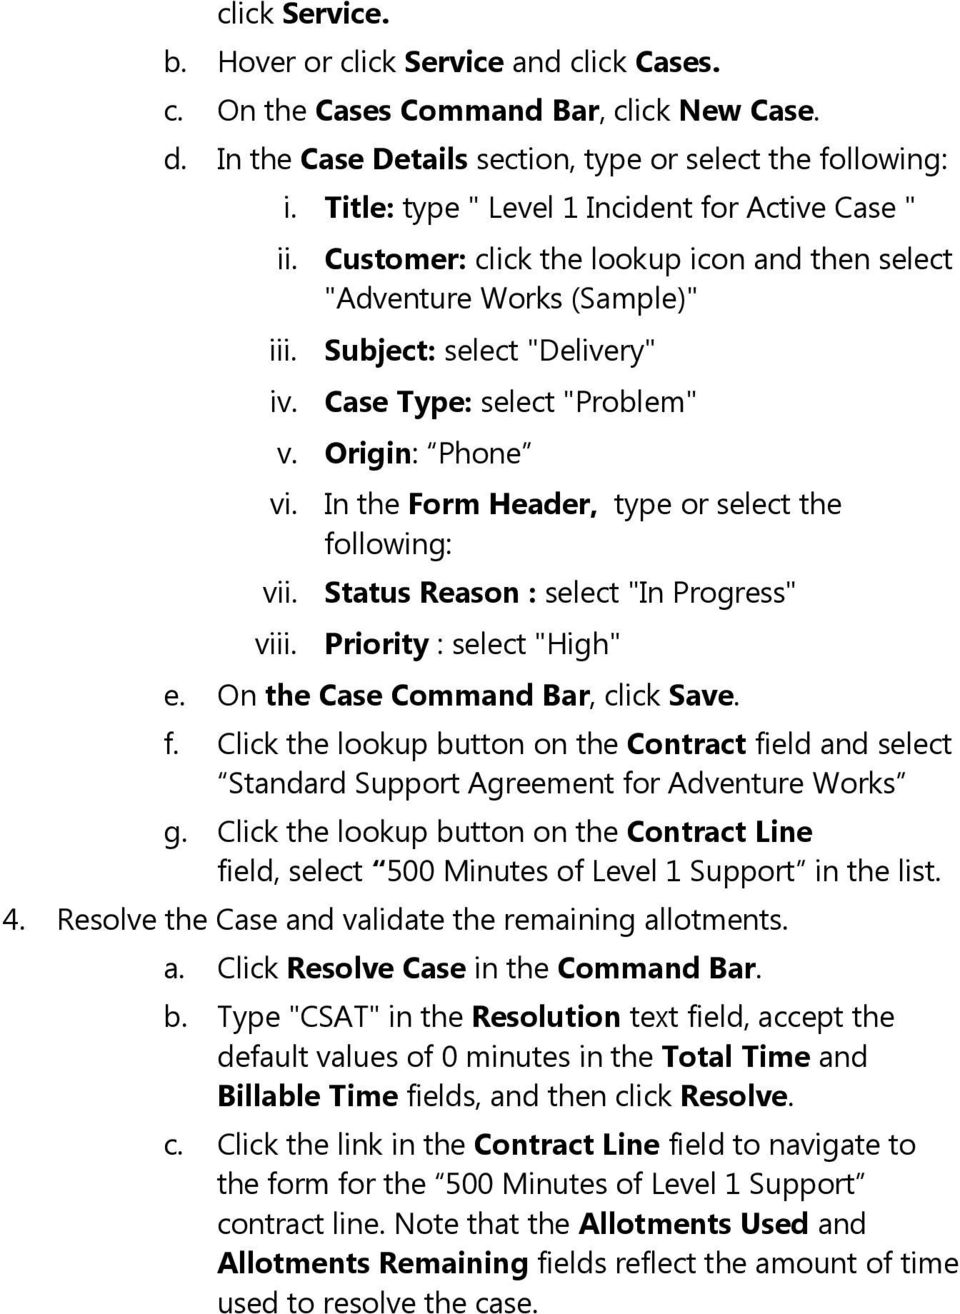 Origin: Phone vi. In the Form Header, type or select the following: vii. Status Reason : select "In Progress" viii. Priority : select "High" e. On the Case Command Bar, click Save. f. Click the lookup button on the Contract field and select Standard Support Agreement for Adventure Works g.